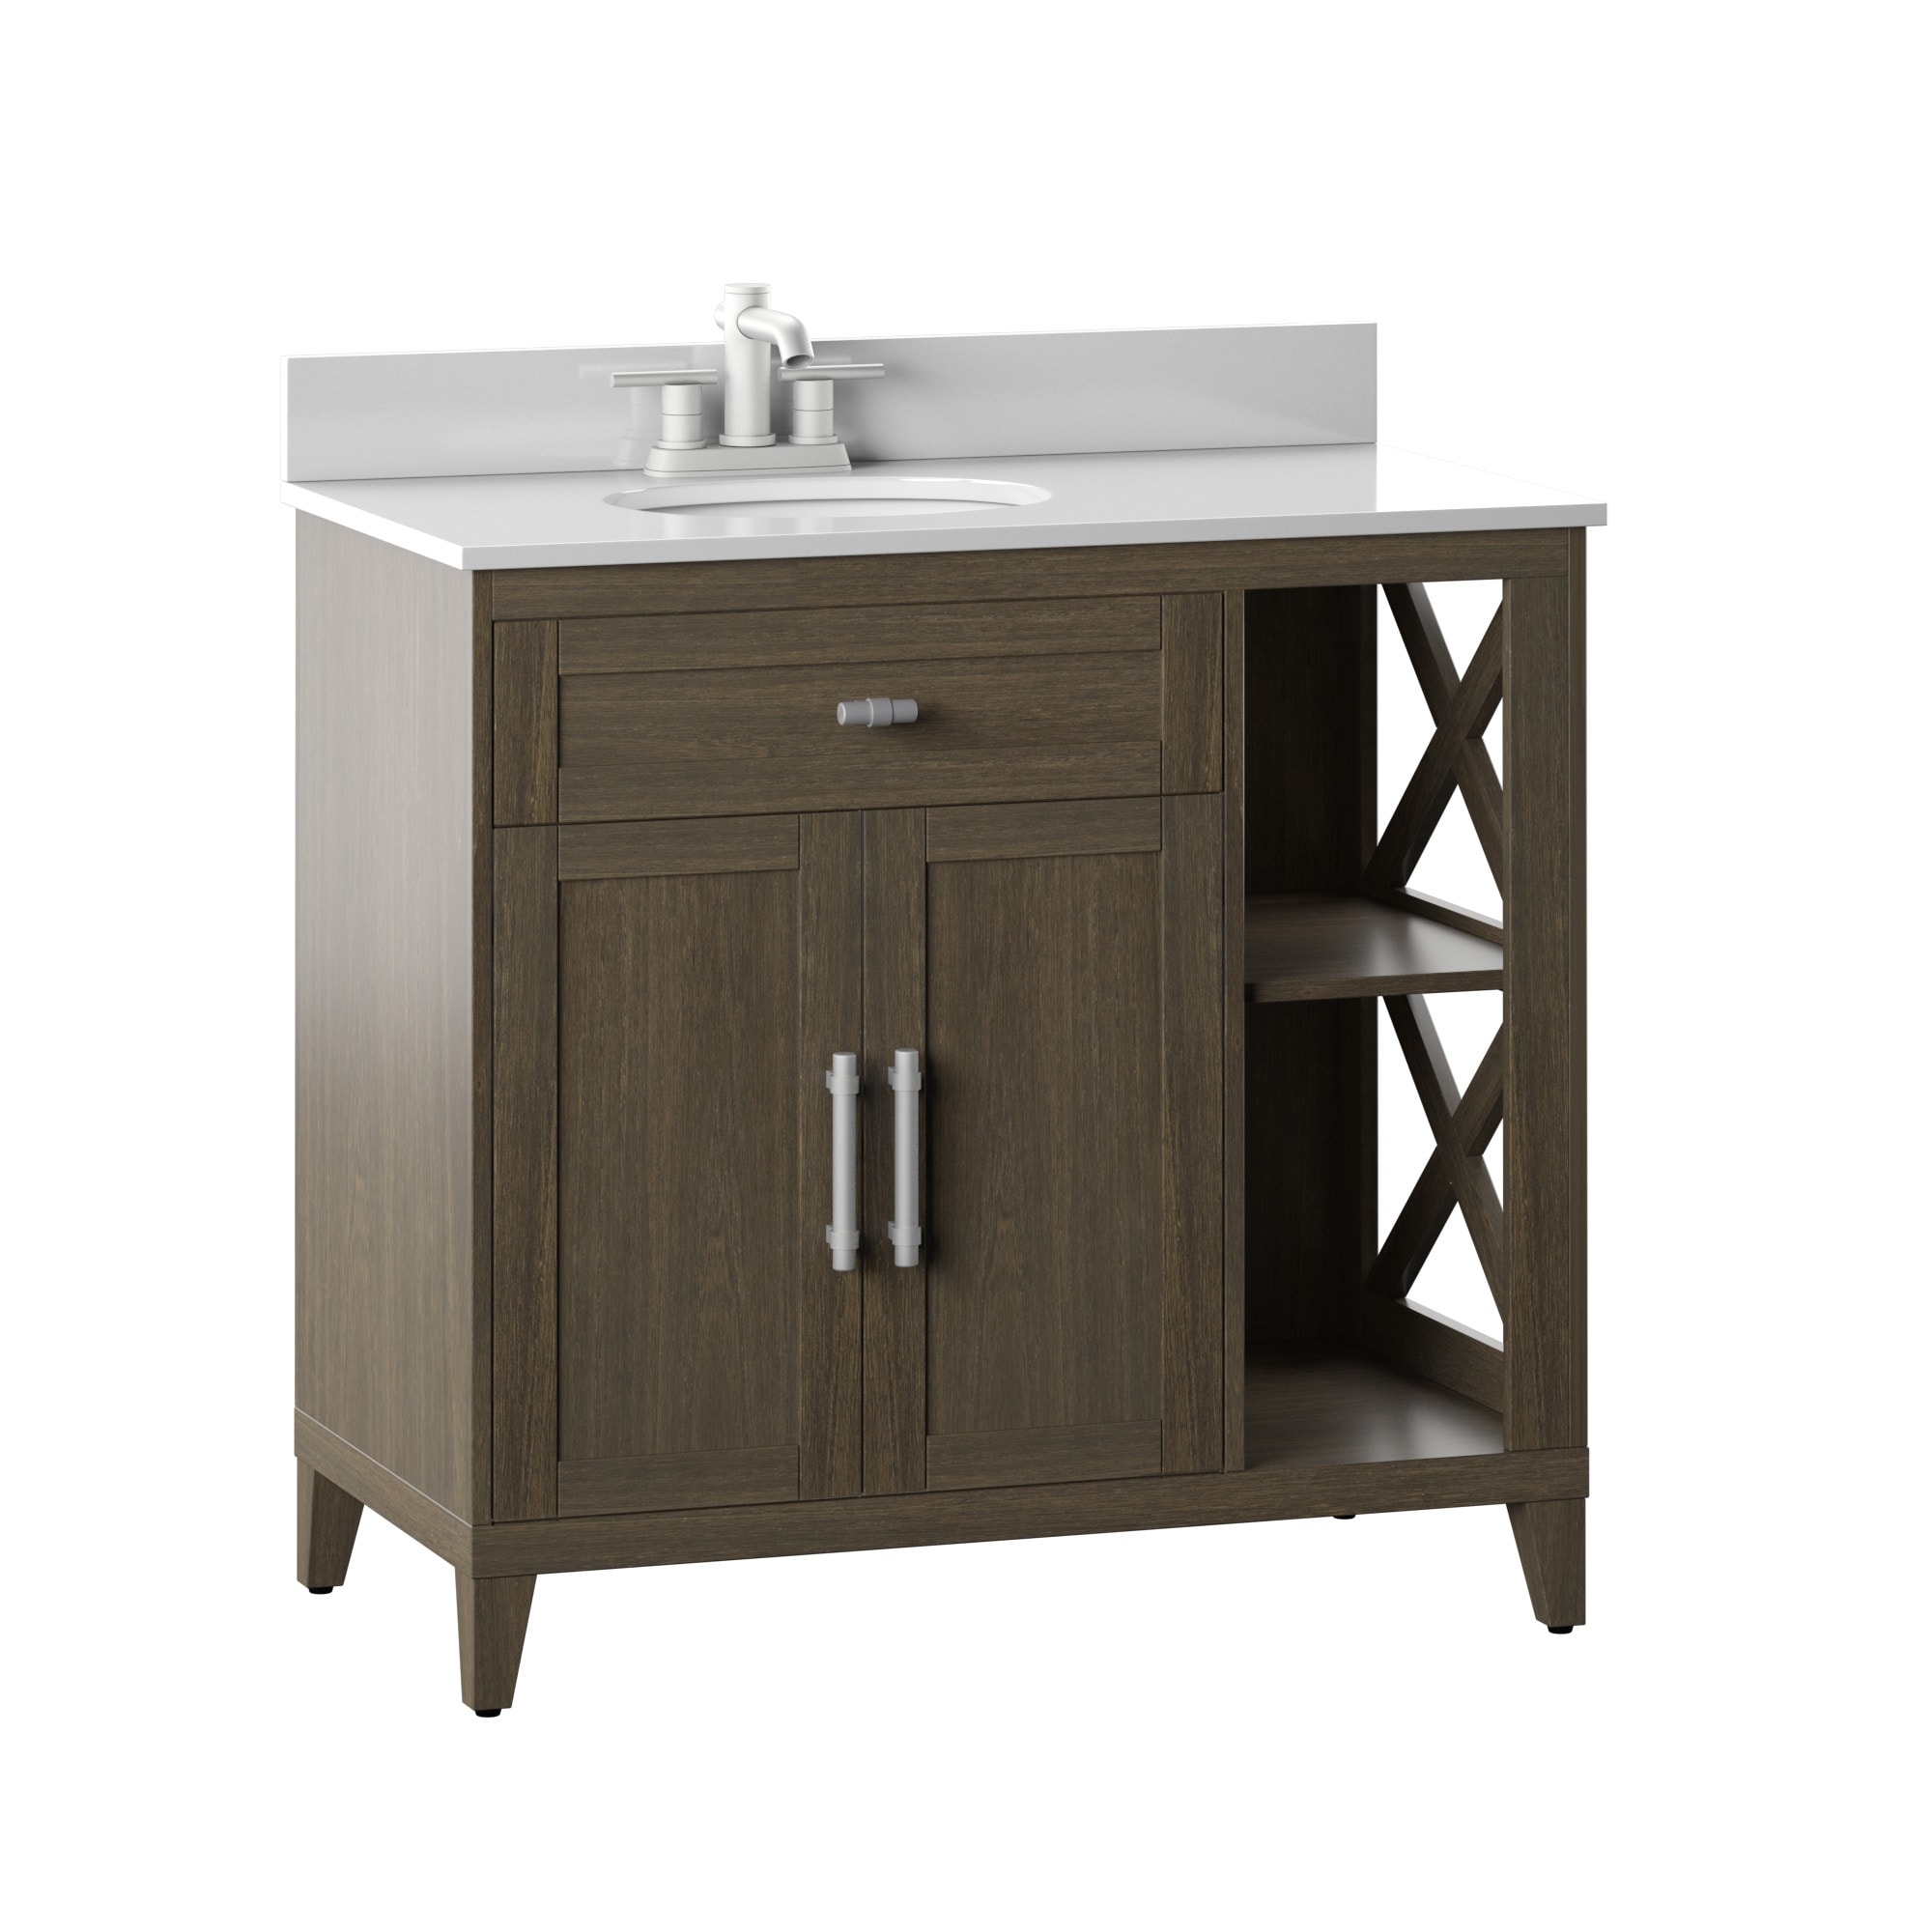 https://ak1.ostkcdn.com/images/products/is/images/direct/afa9e40e1a6c5f3dd4995545c7ecf4e9261c13a5/36%22-Bathroom-Vanity-with-Open-X-Shelves.jpg